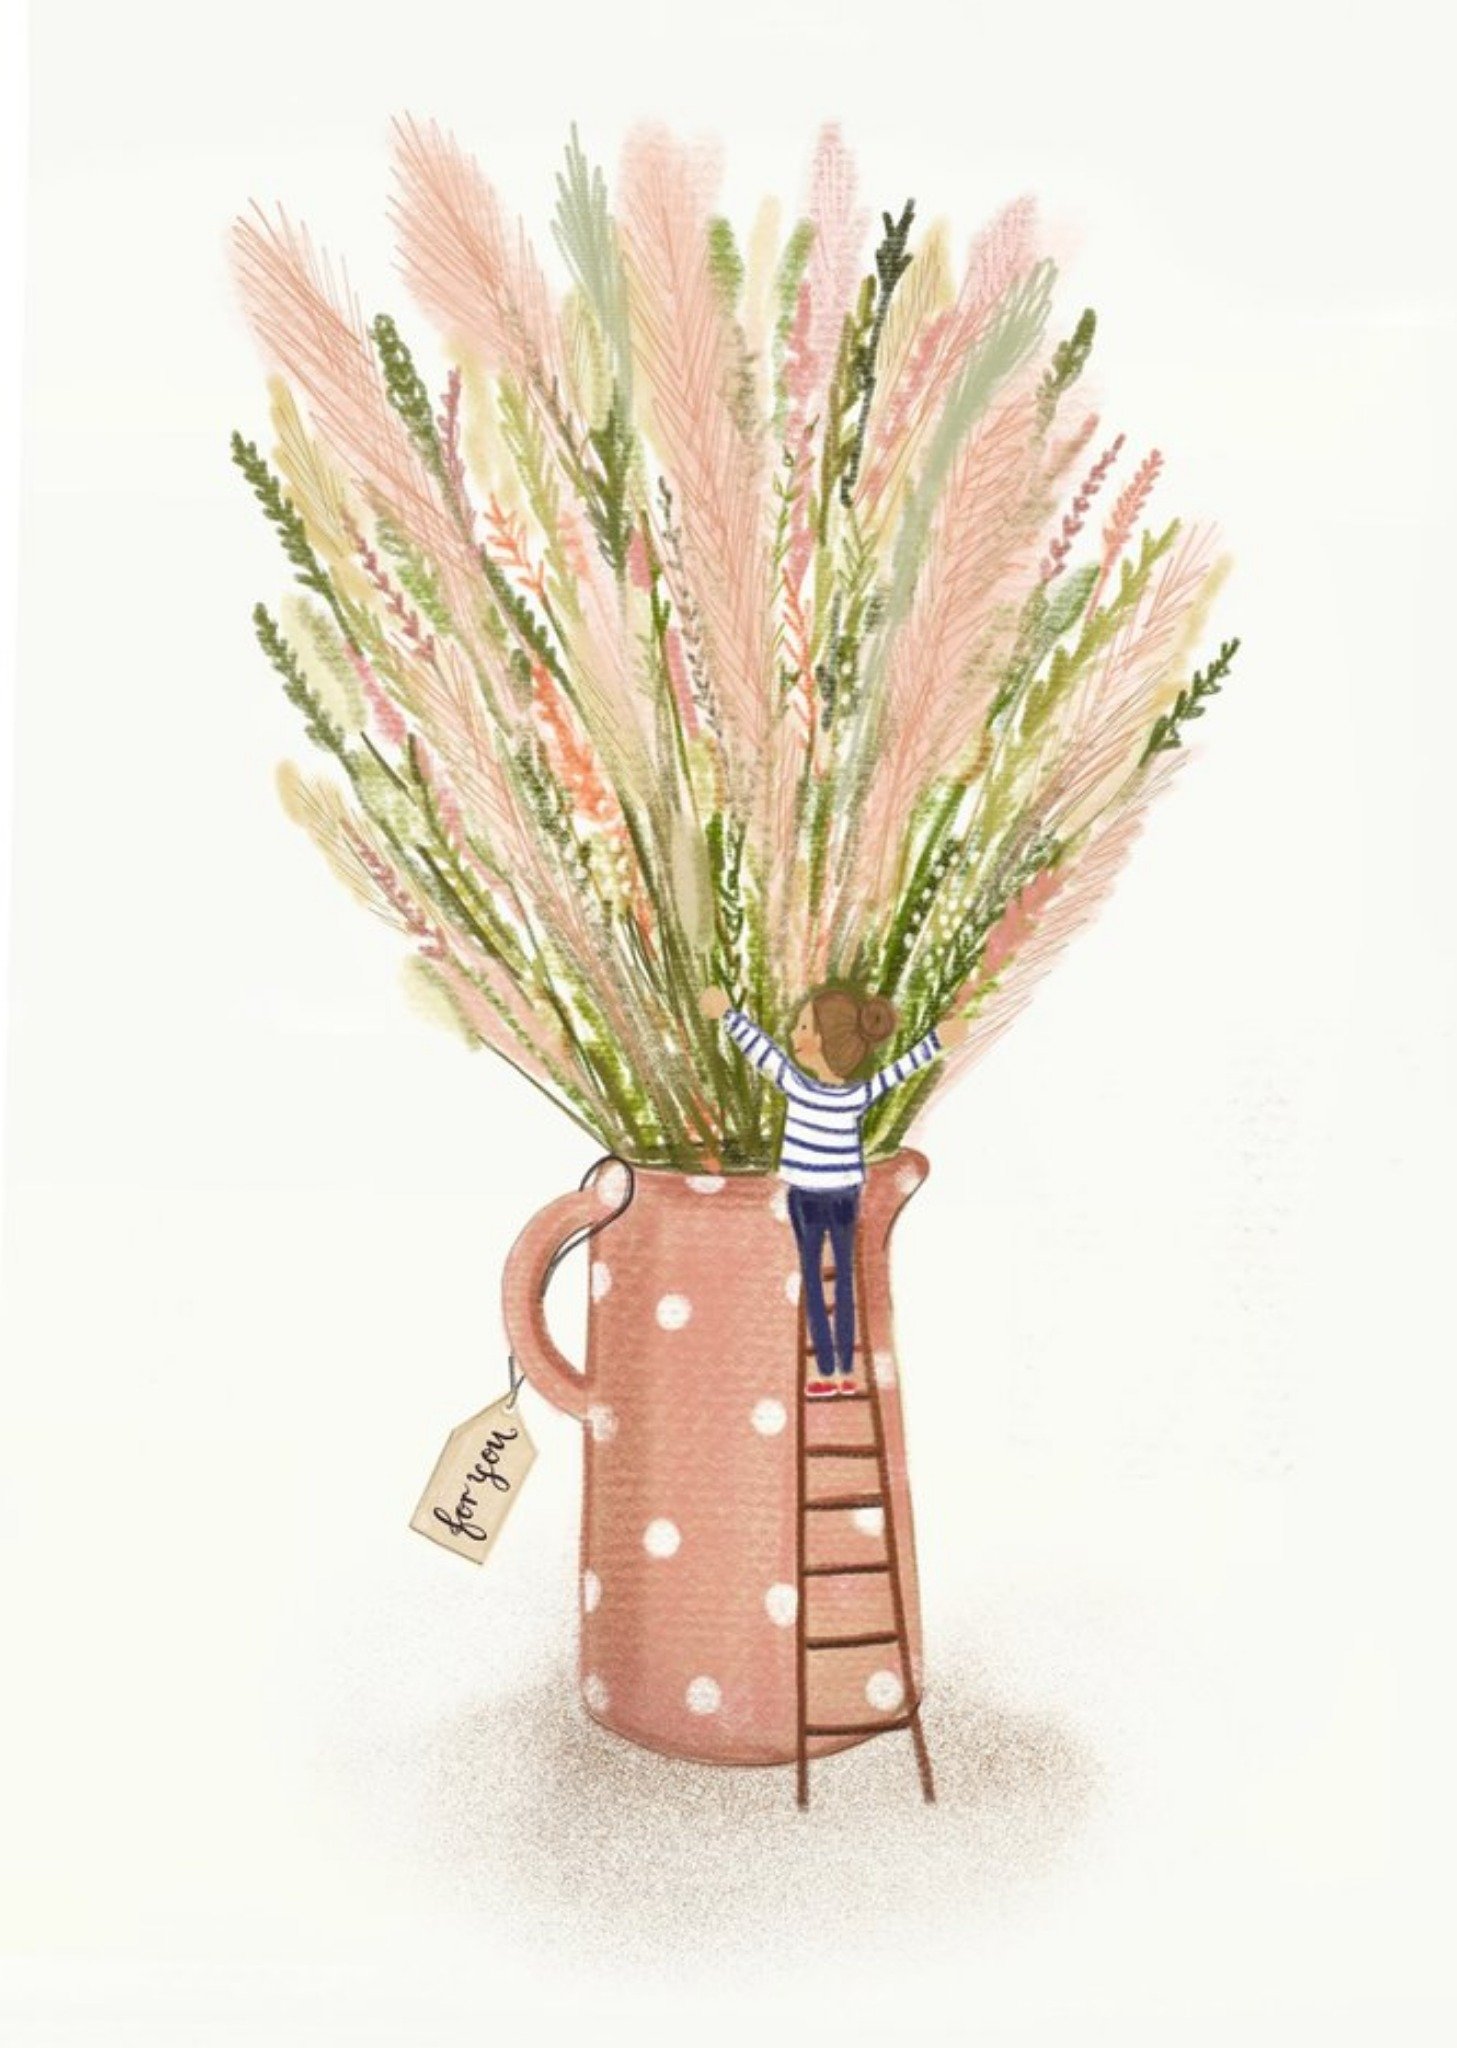 Moonpig Illustration Of A Woman With An Oversized Vase Of Wild Grass Just To Say Card, Large